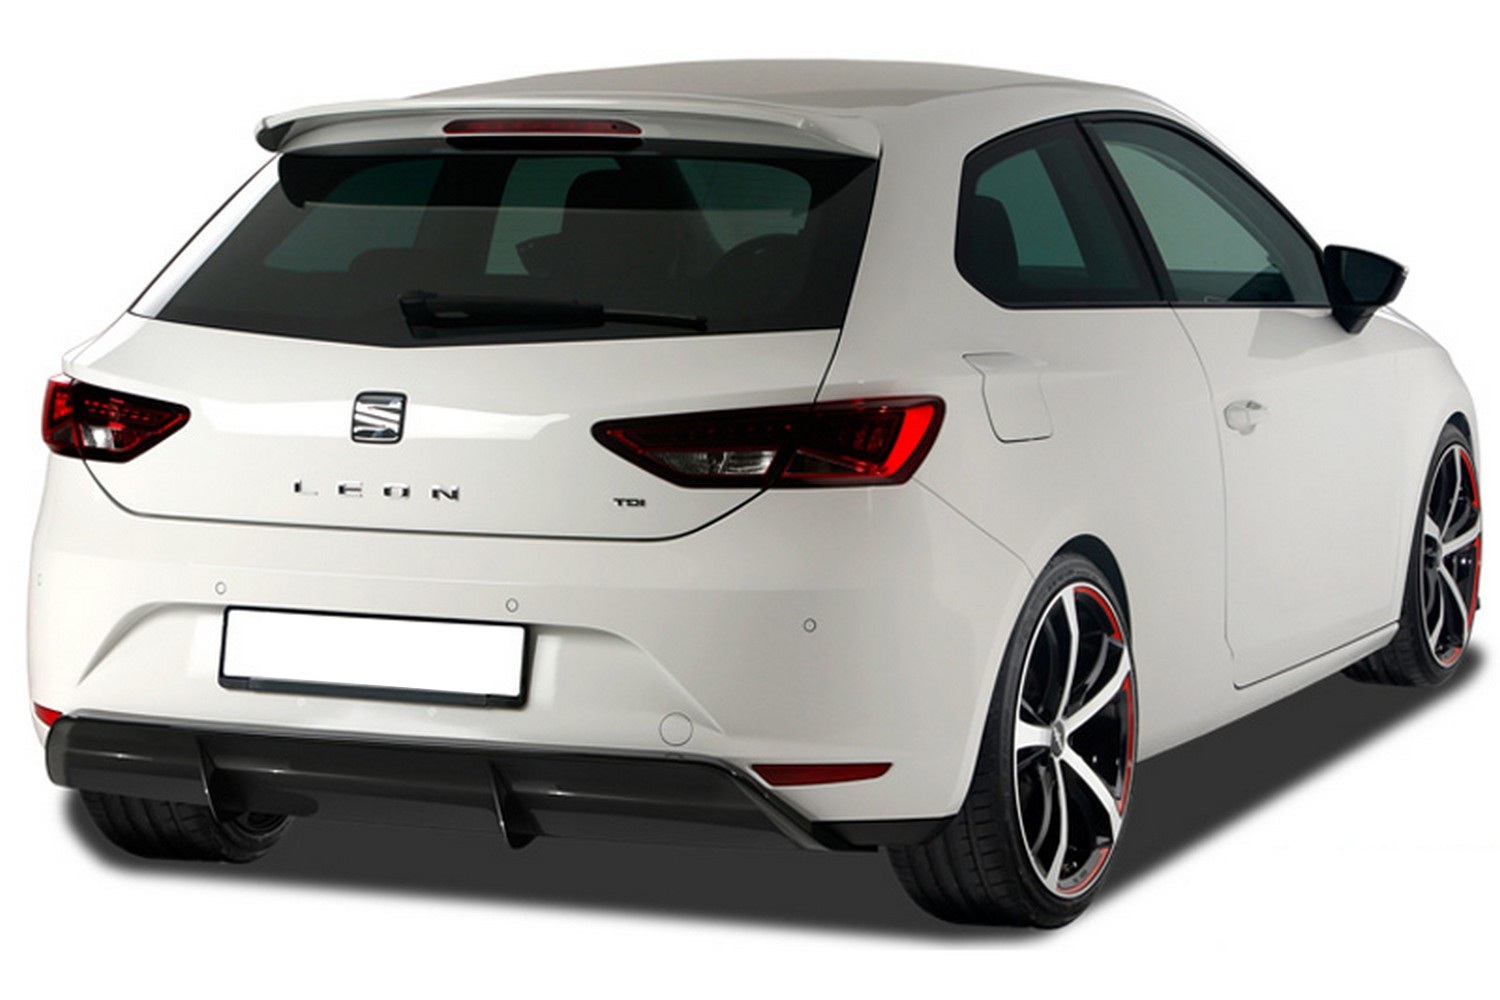 Seat Leon MK3 5F For Back Glass Top Spoiler,leon 5 Dr 2013 - 2020 5F For  Back Windbreaker All Color Choices